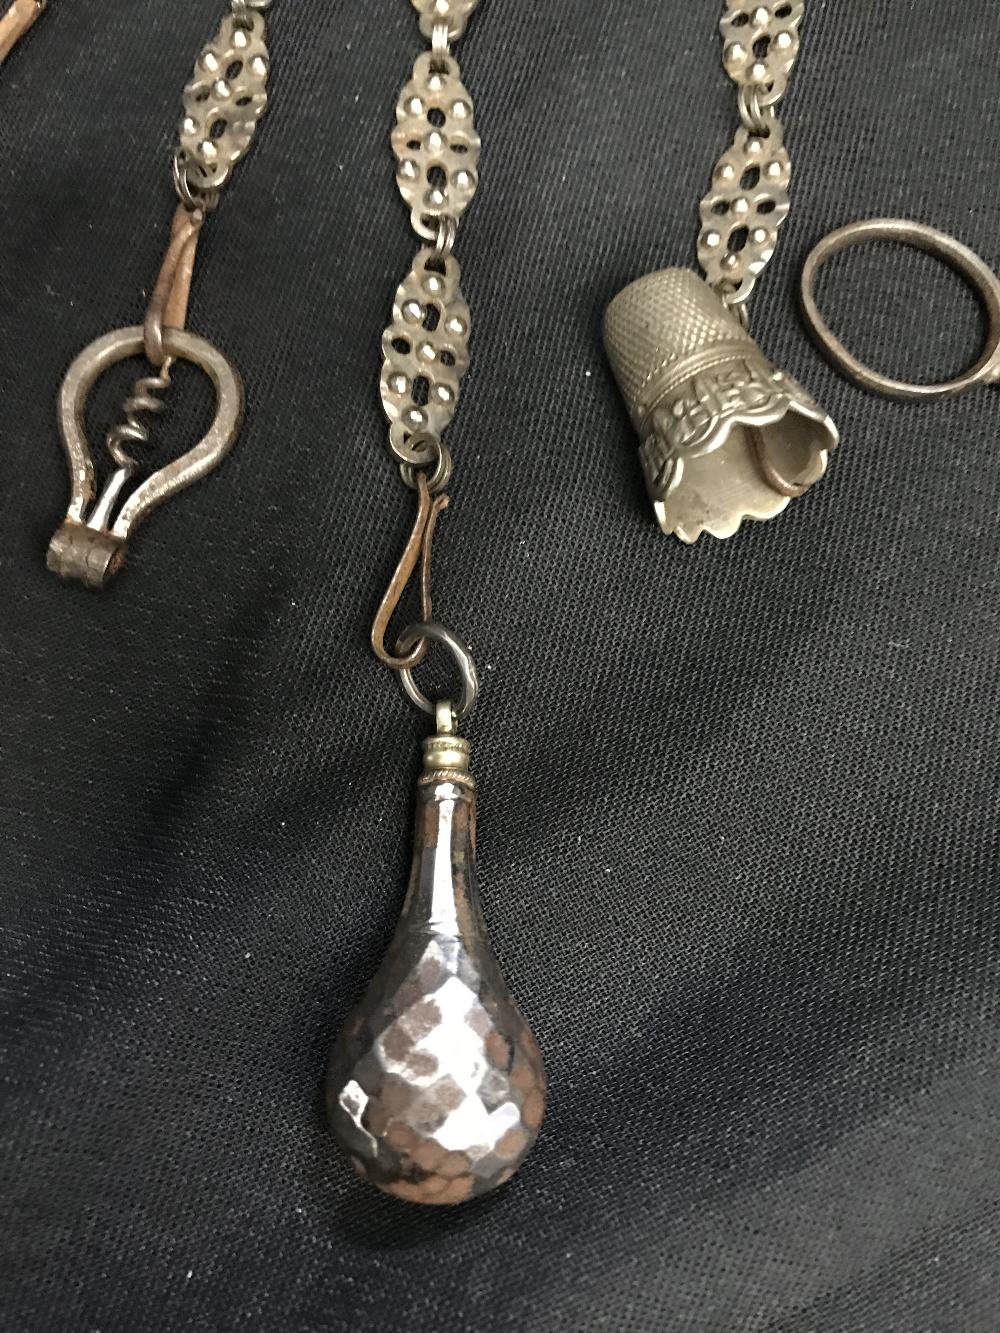 Corkscrews/Wine Collectables: Late 18th cent. Bright cut steel Chatelaine, 7 hangers with a photo - Bild 3 aus 5